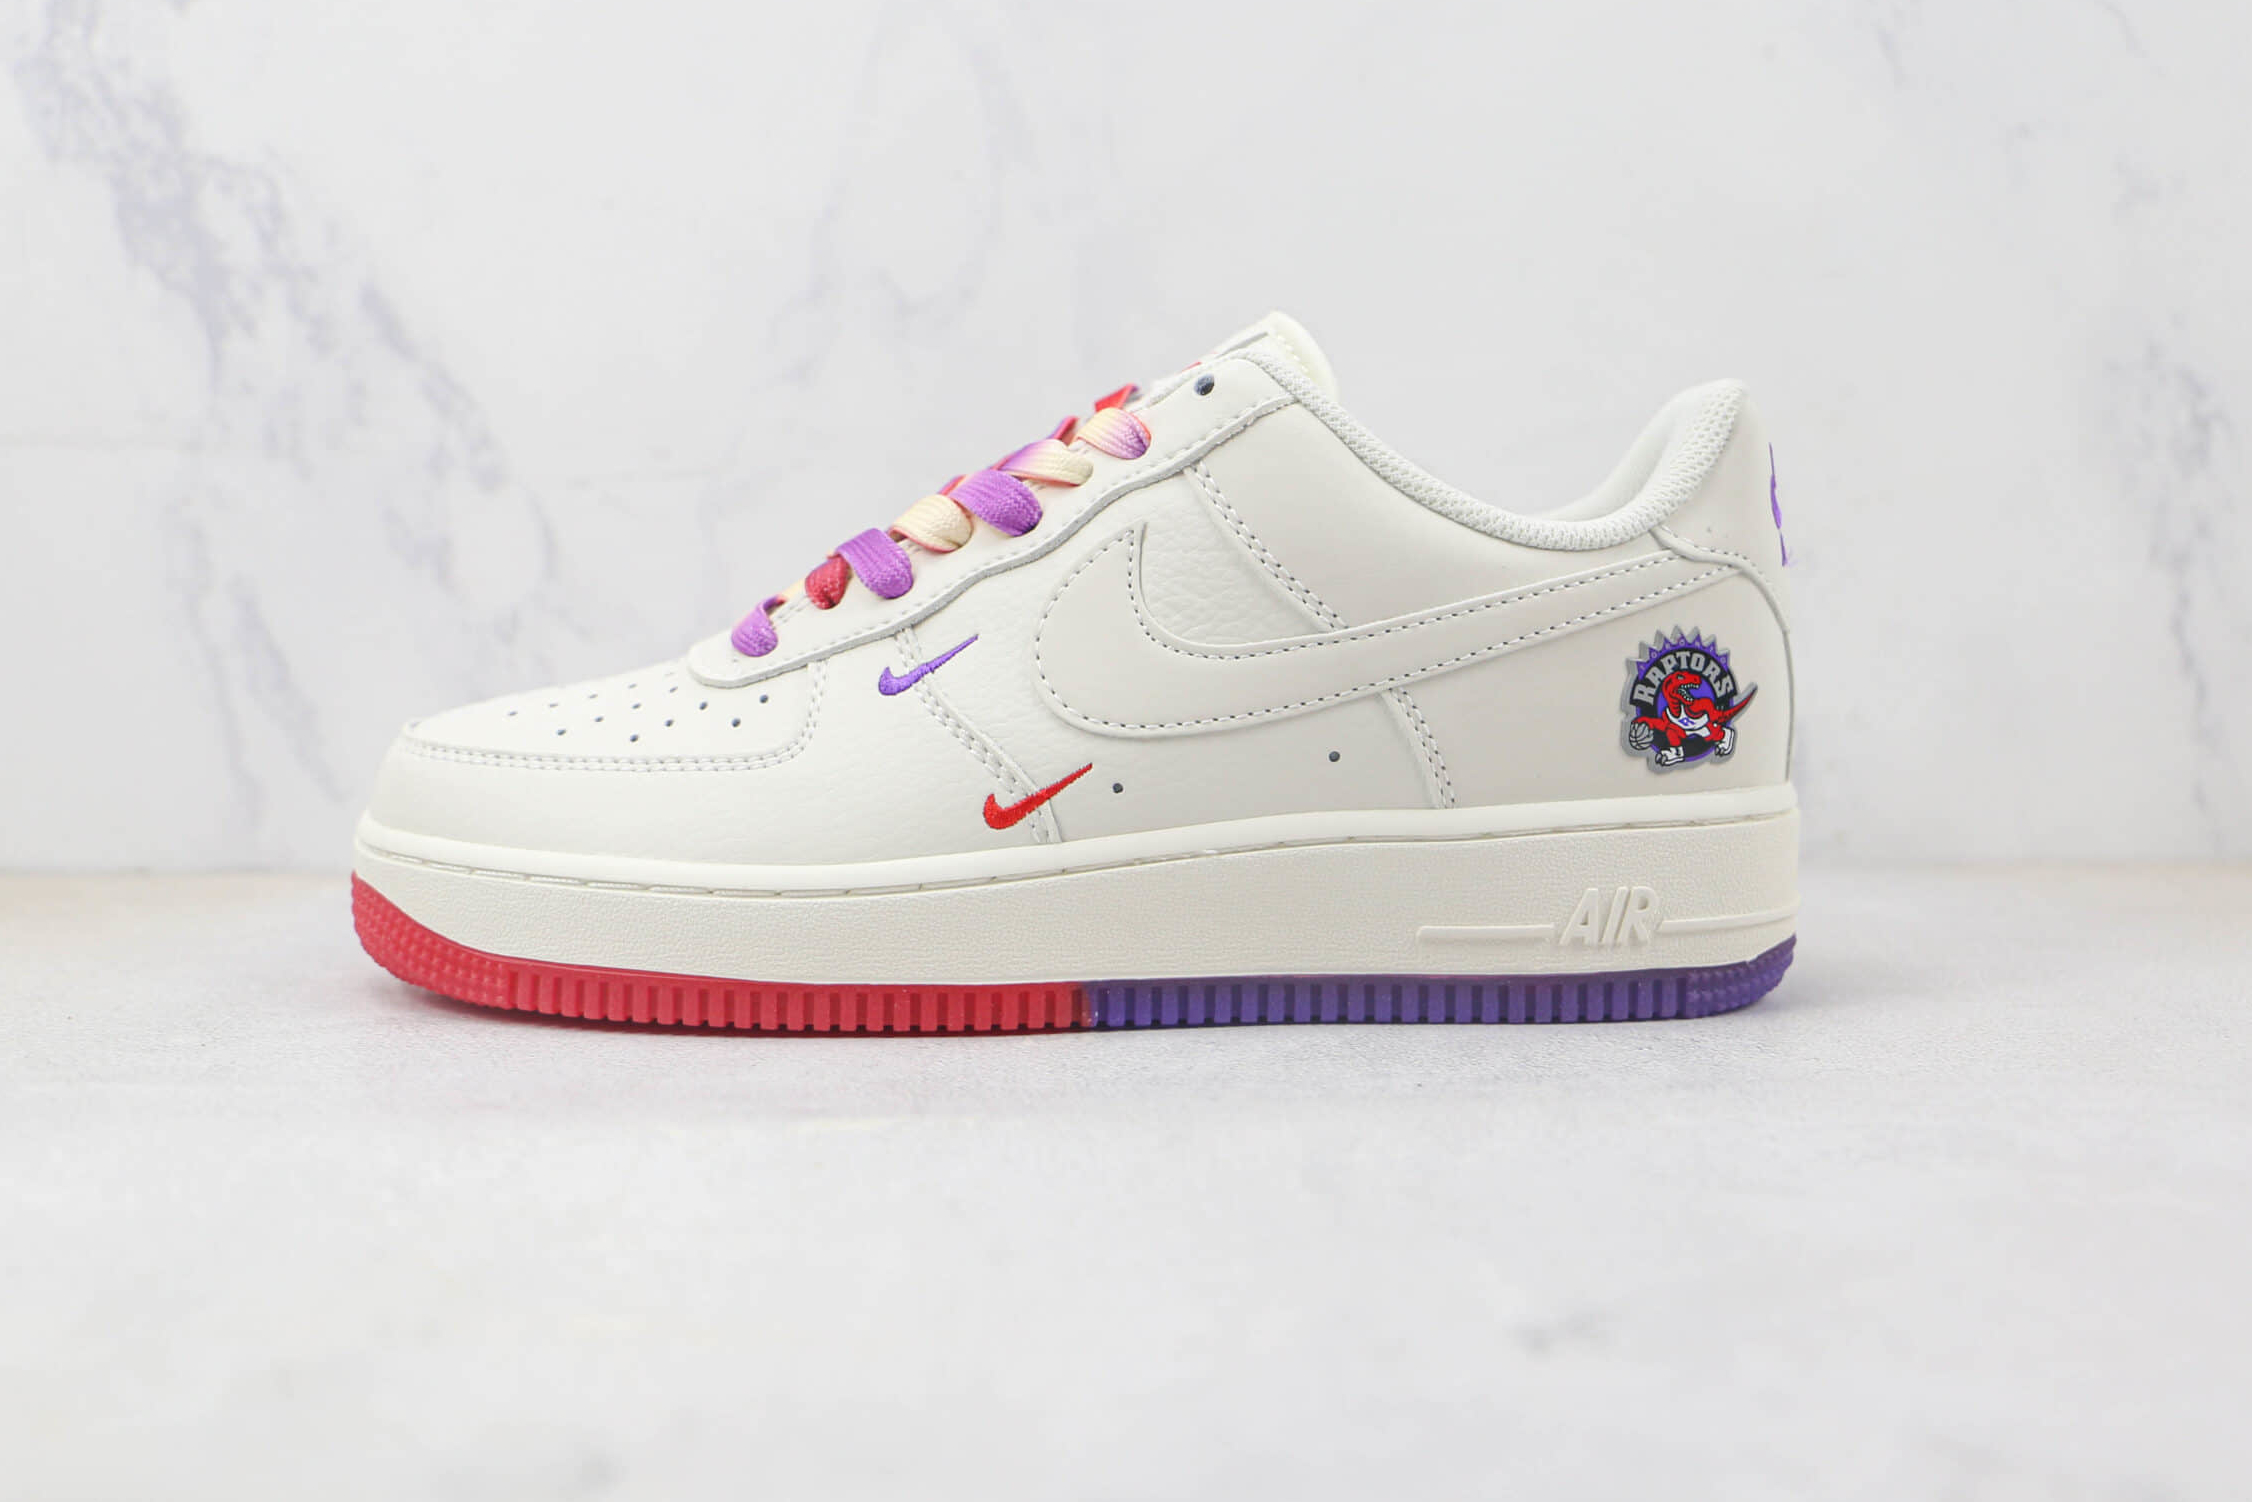 Nike Air Force 1 07 Low White Purple Red KK6325-015 - Trendy Colorway, Premium Quality | Limited Stock